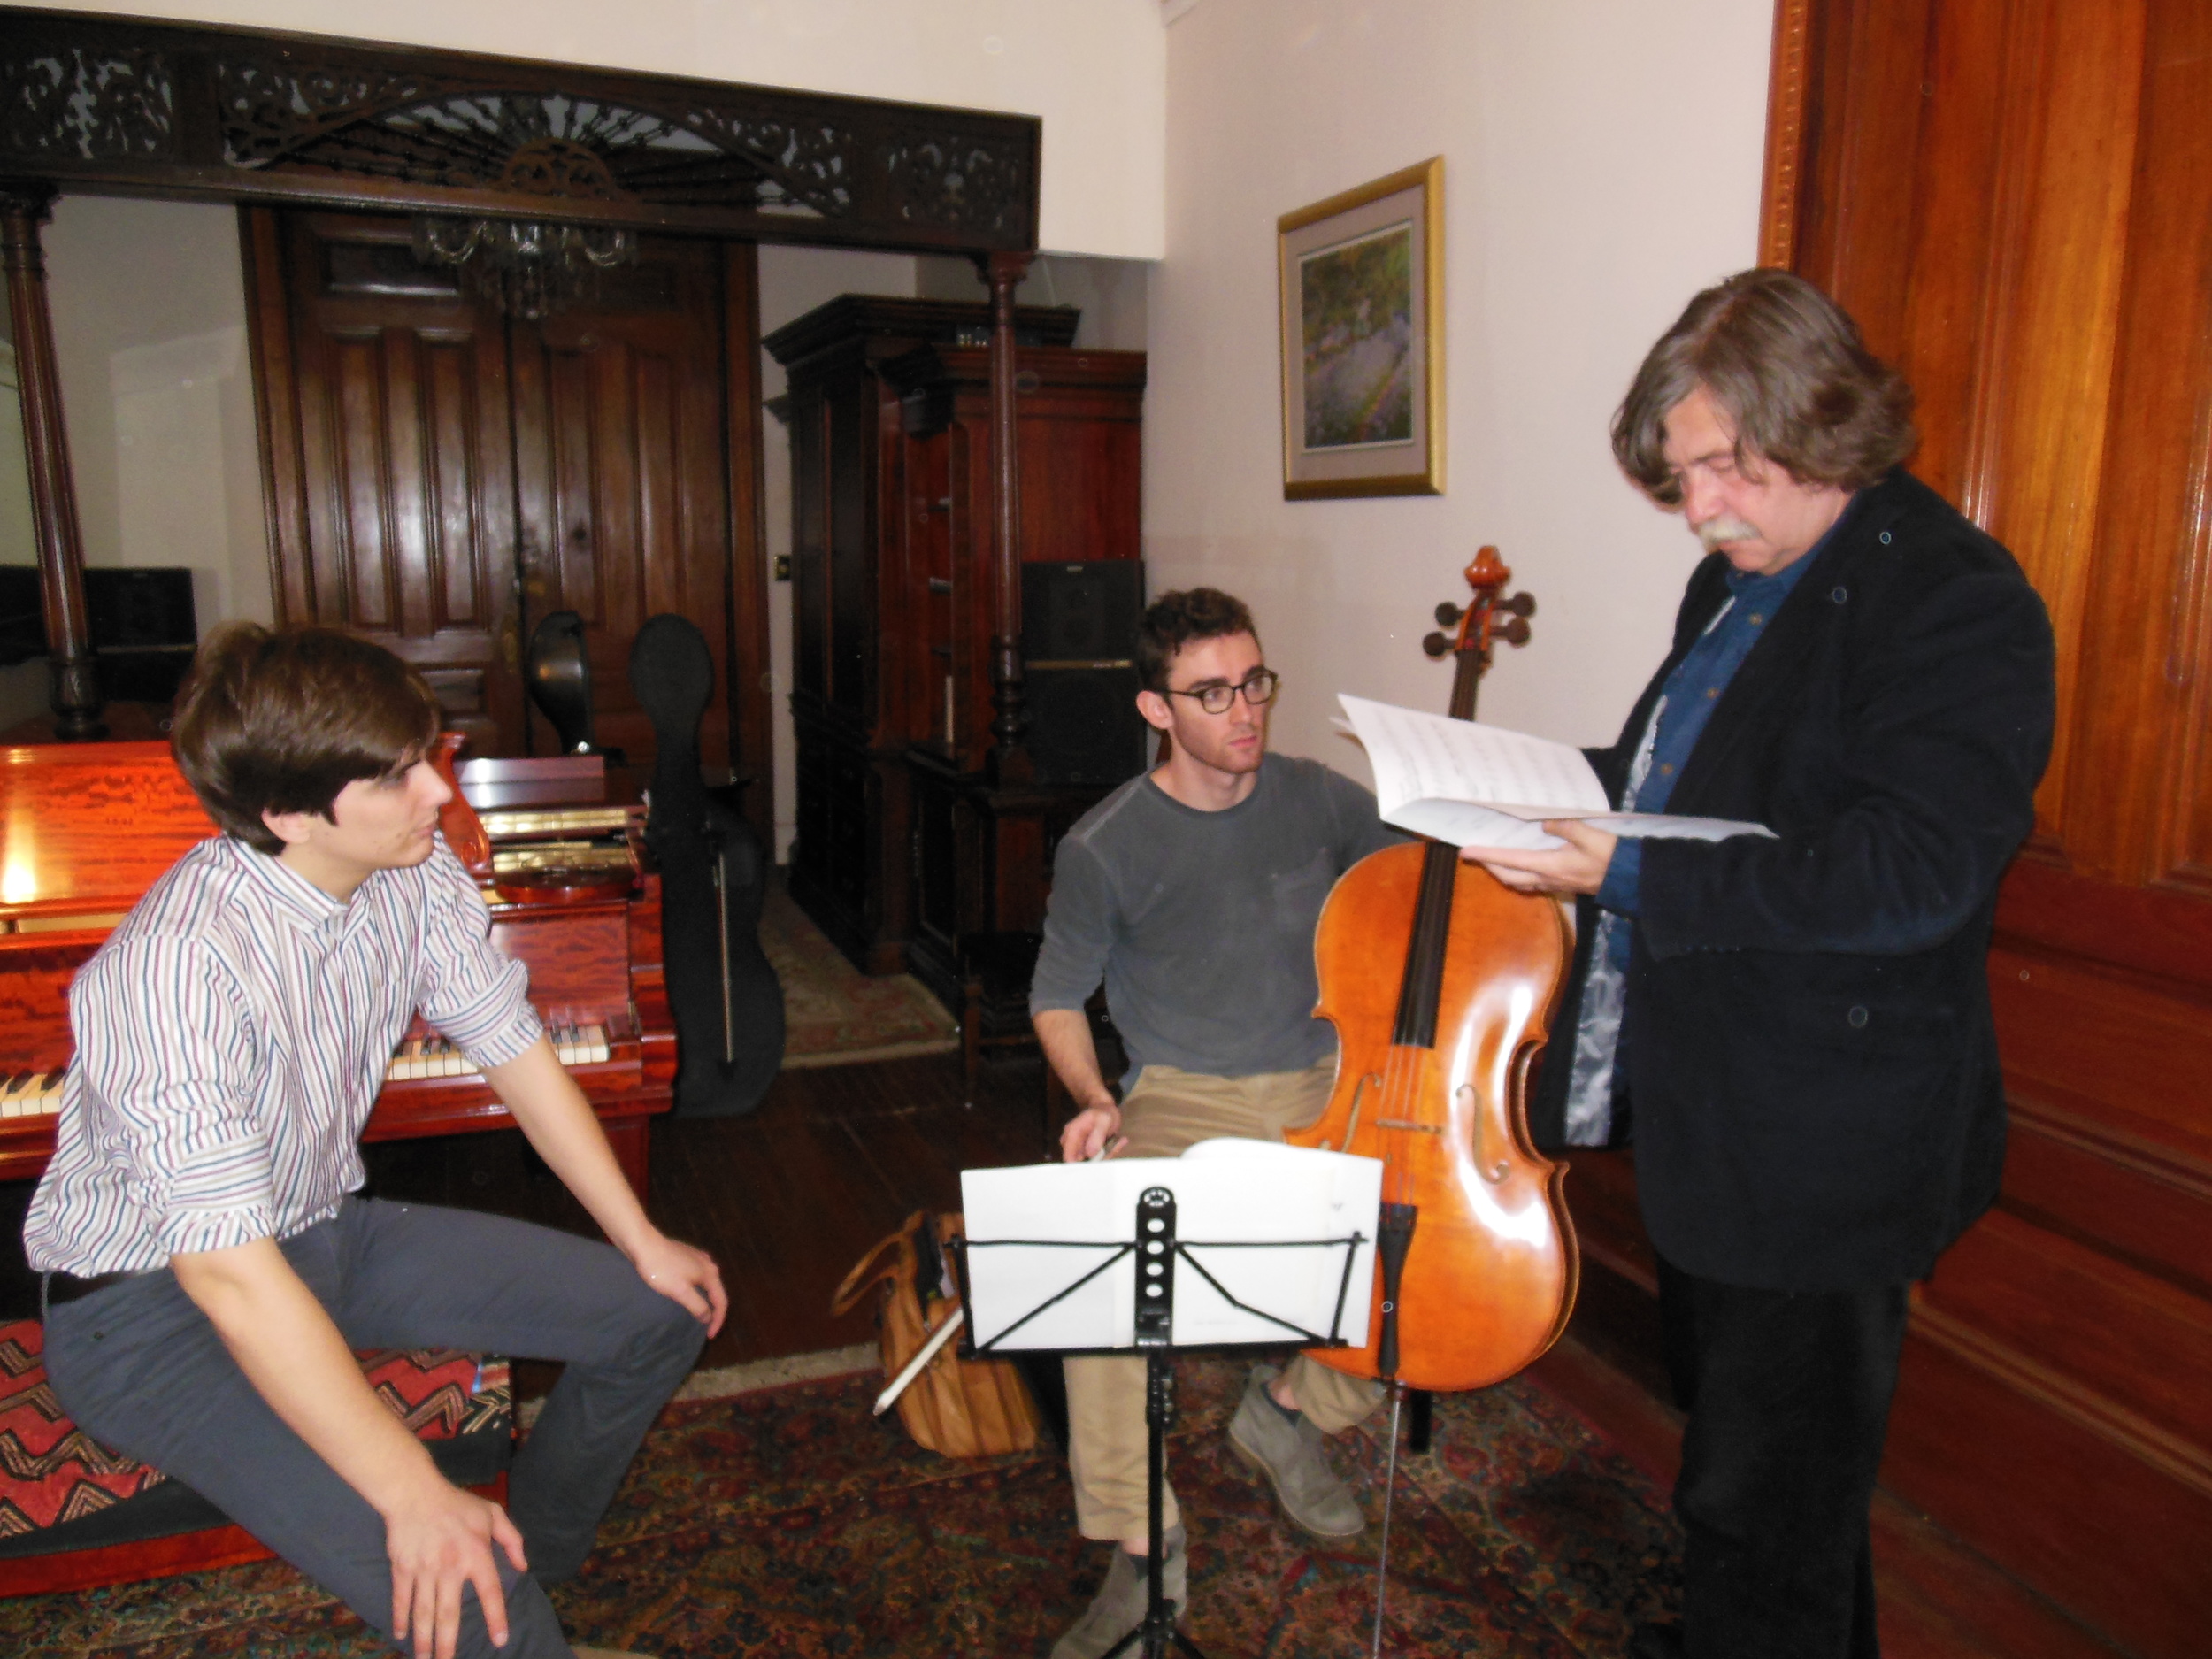  Nathaniel LaNasa (left) and Colin Stokes (center) rehearse with the great composer Vladimír Godár prior to the event. Photo: Katarina Godár 